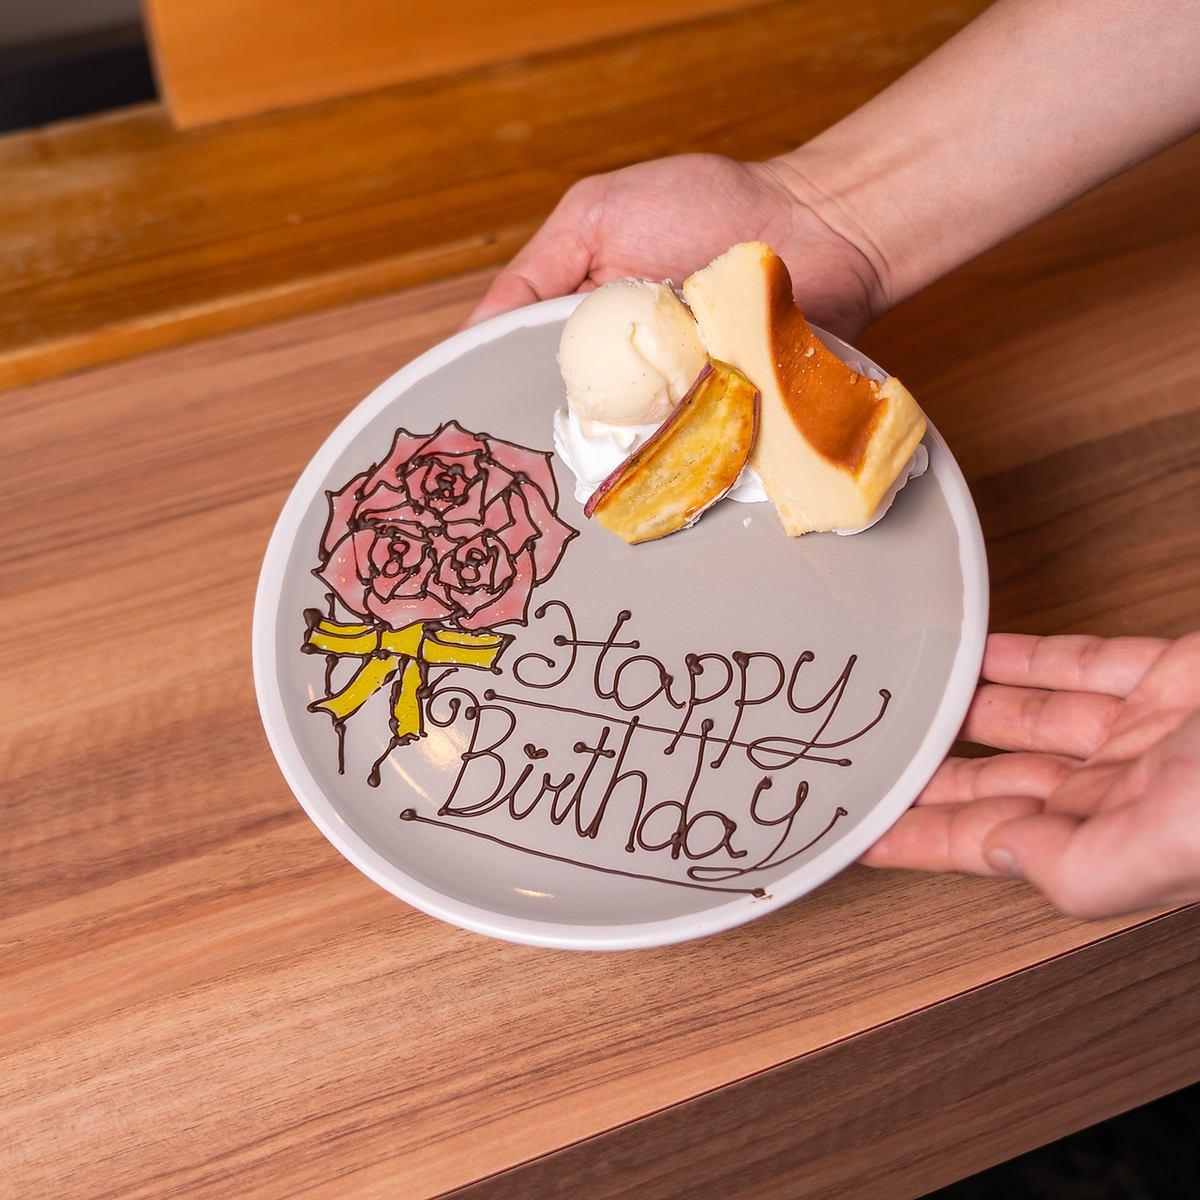 Luxurious dinner for birthdays and anniversaries starting at 5,500 yen! Plates available♪